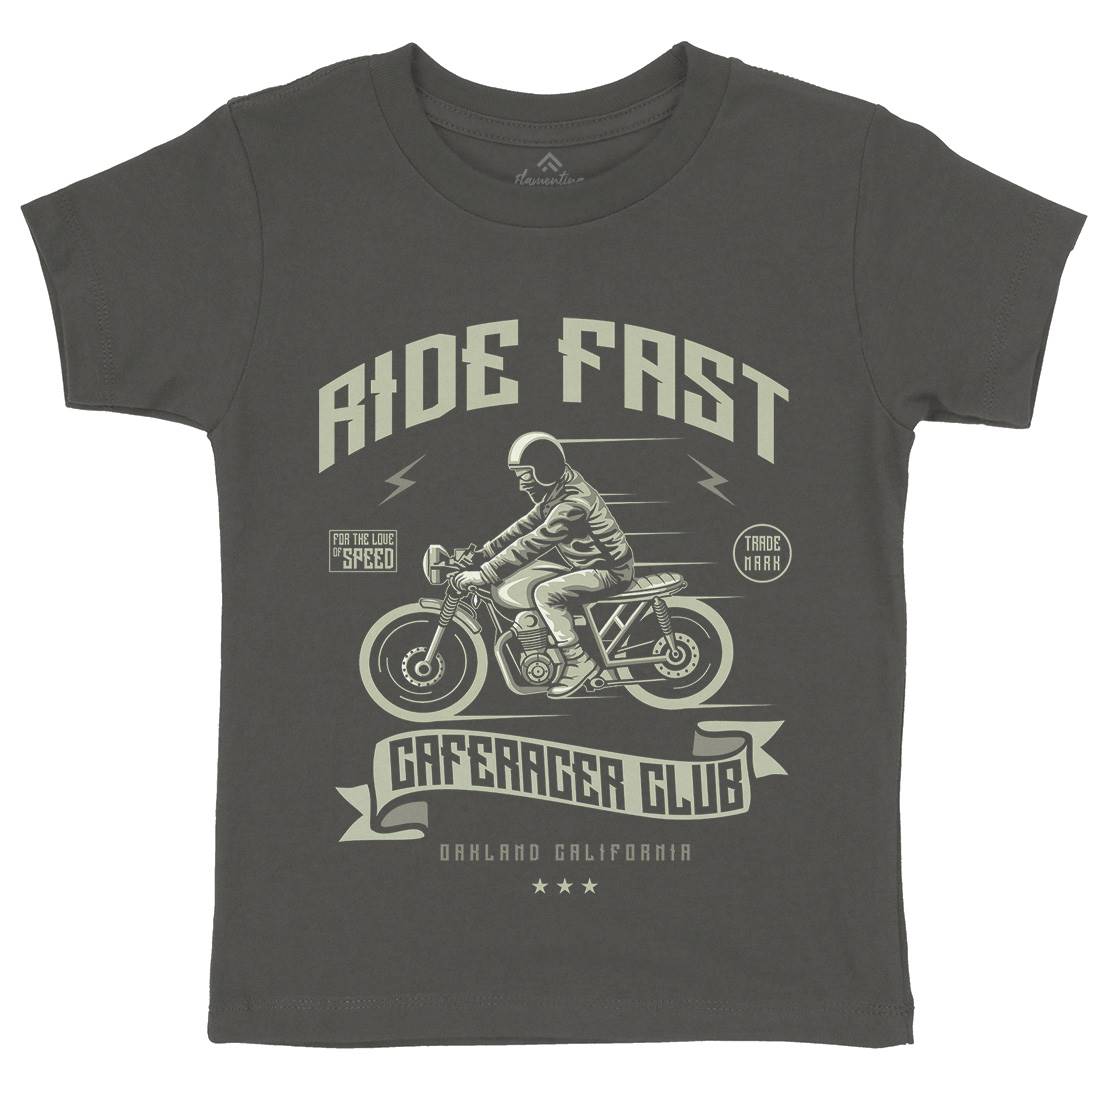 Ride Fast Kids Crew Neck T-Shirt Motorcycles A117